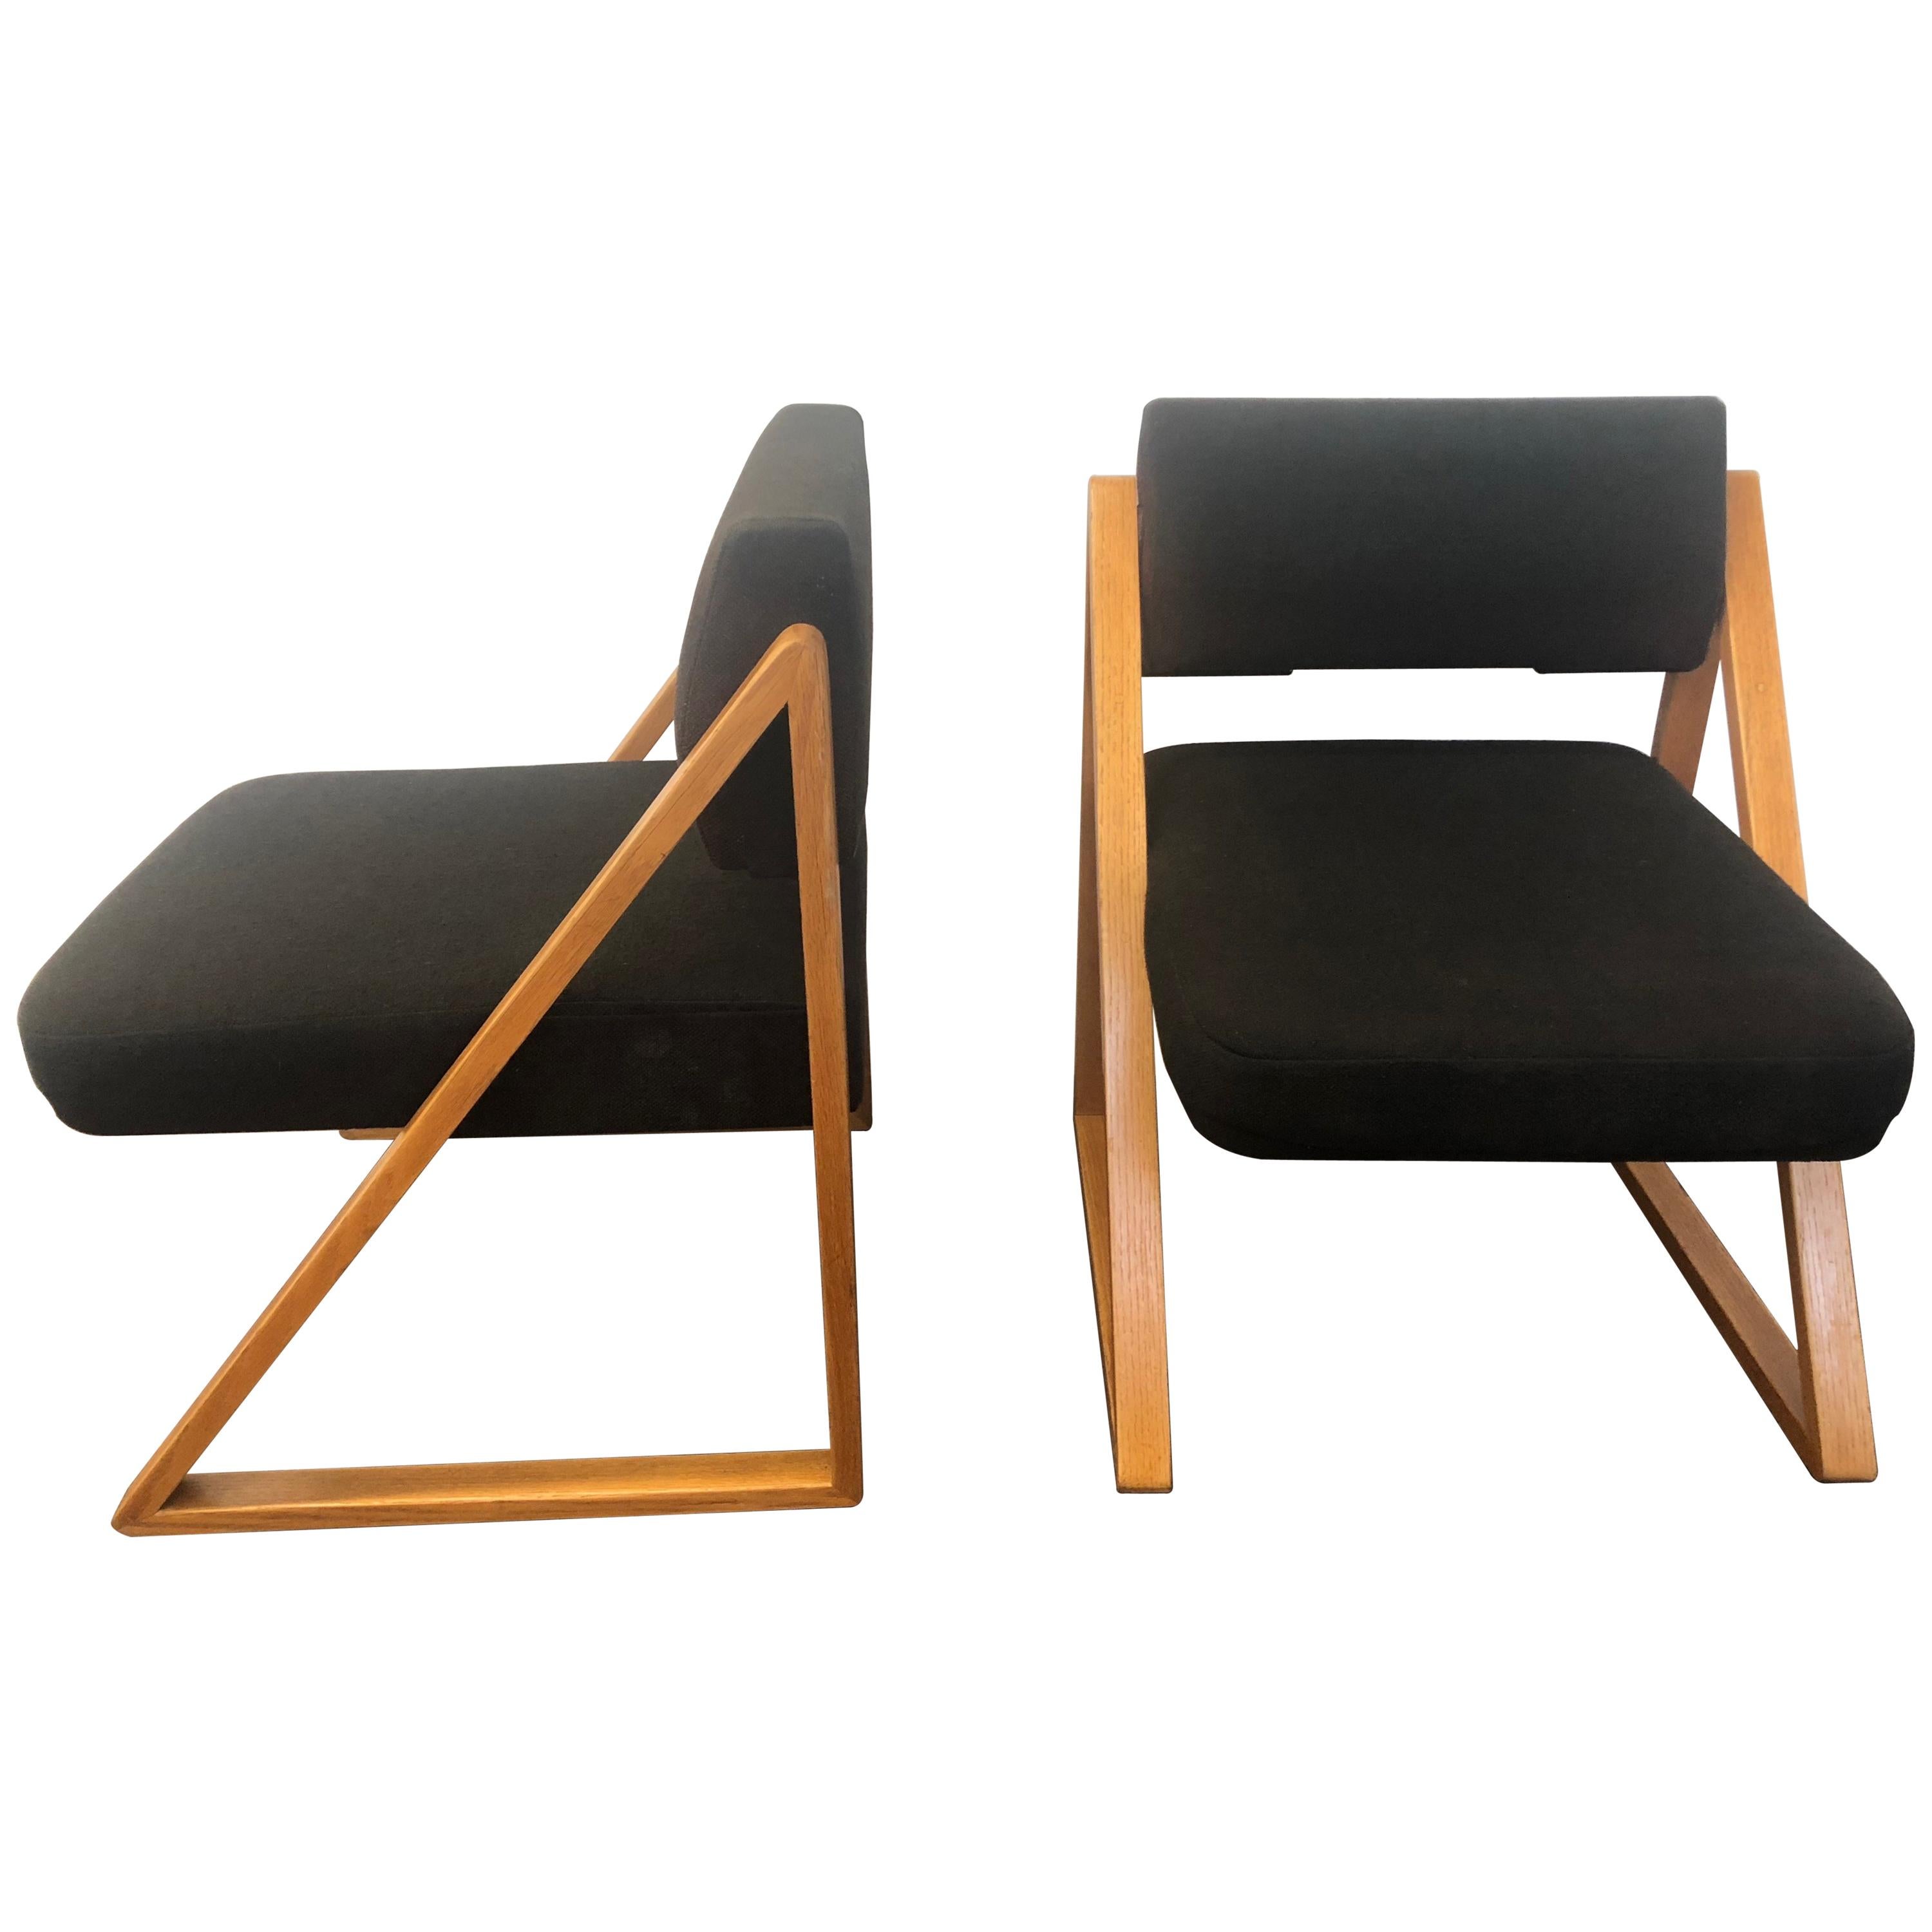 Pair of Solid Oak Lounge Chairs, France, circa 1965 For Sale